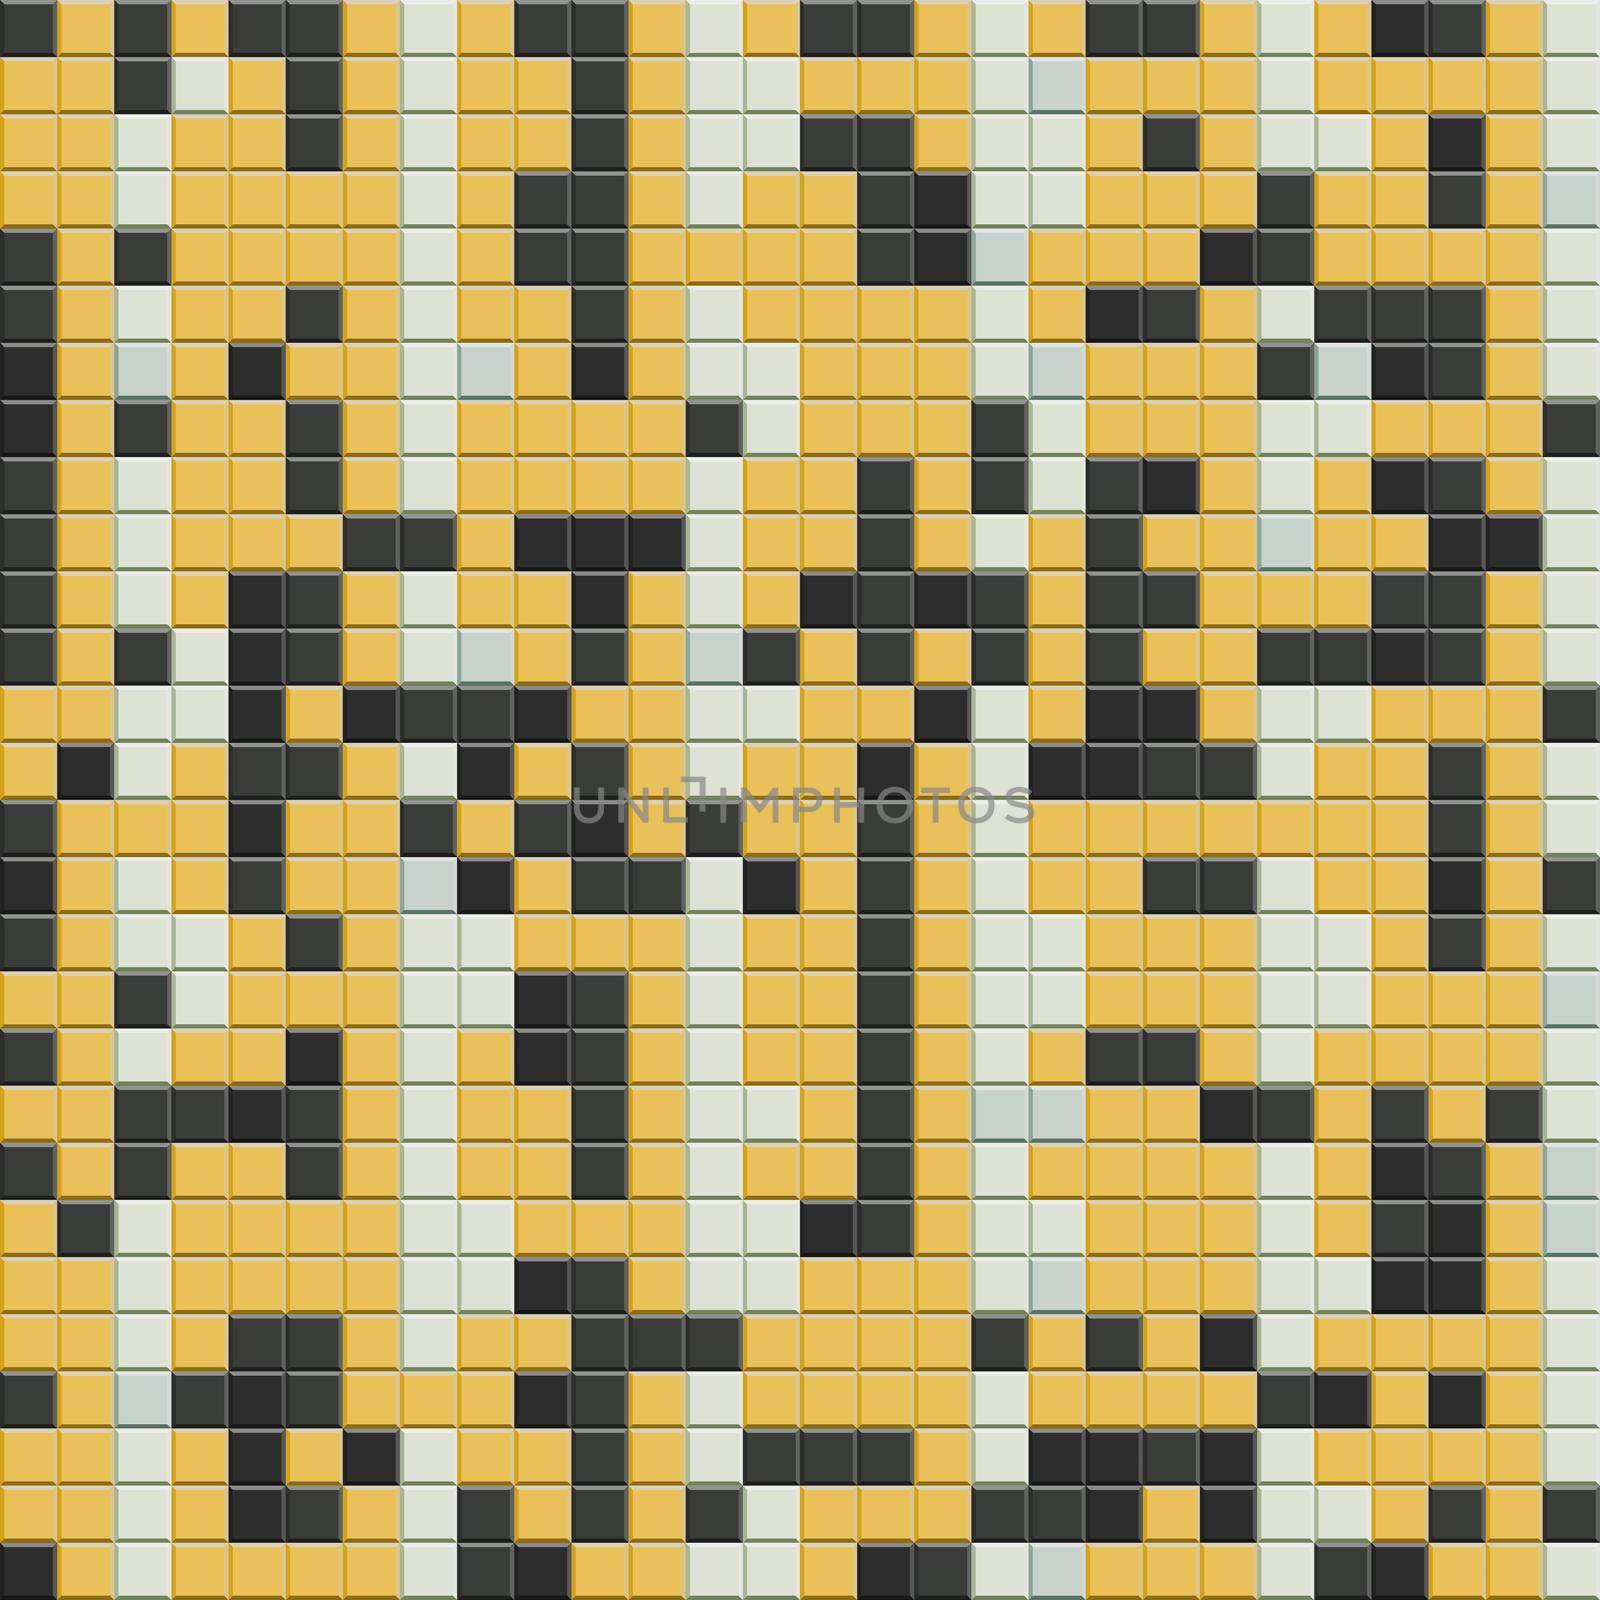 Black and yellow small cubical bricks pattern on solid sheet of wallpaper. Concept of home decor and interior designing by tabishere